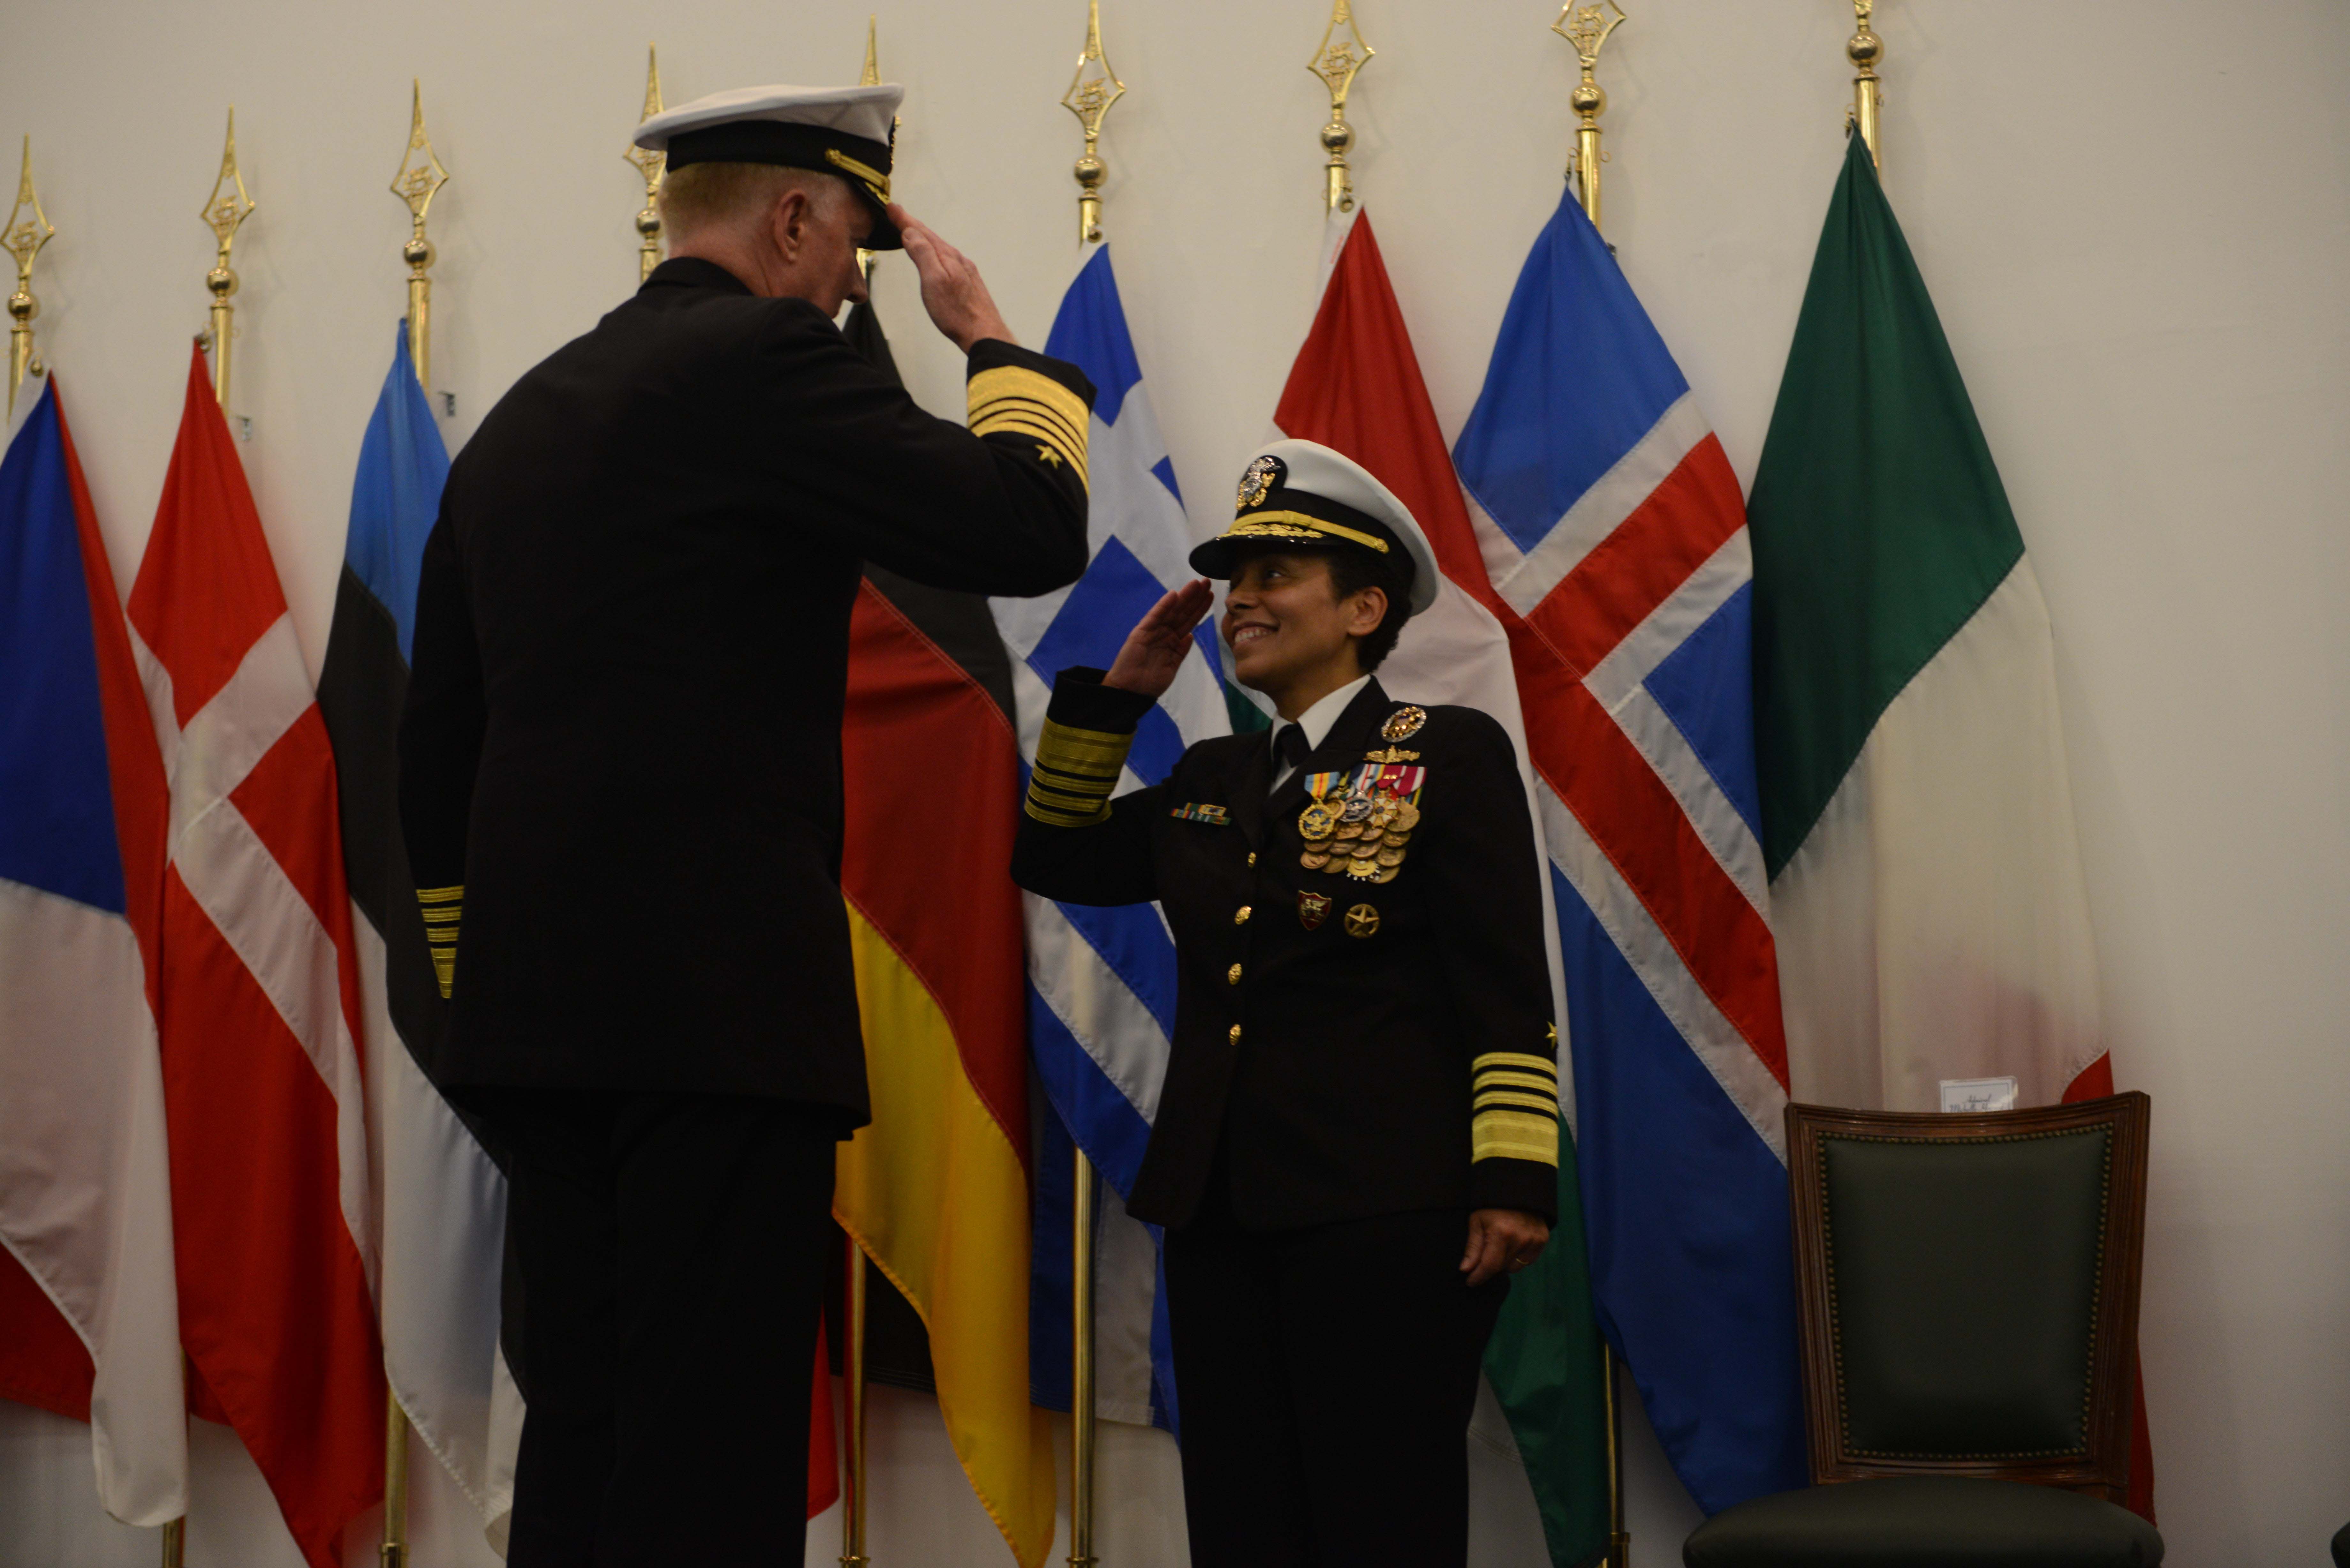 171020-N-WO404-188 NAPLES, Italy (Oct. 20, 2017) Adm. James Foggo III relieves Adm. Michelle Howard as commander, Allied Joint Force Command Naples and commander, U.S. Naval Forces Europe-Africa during a change of command ceremony held at the Allied Joint Force Command auditorium in Naples, Italy. (U.S. Navy photo)